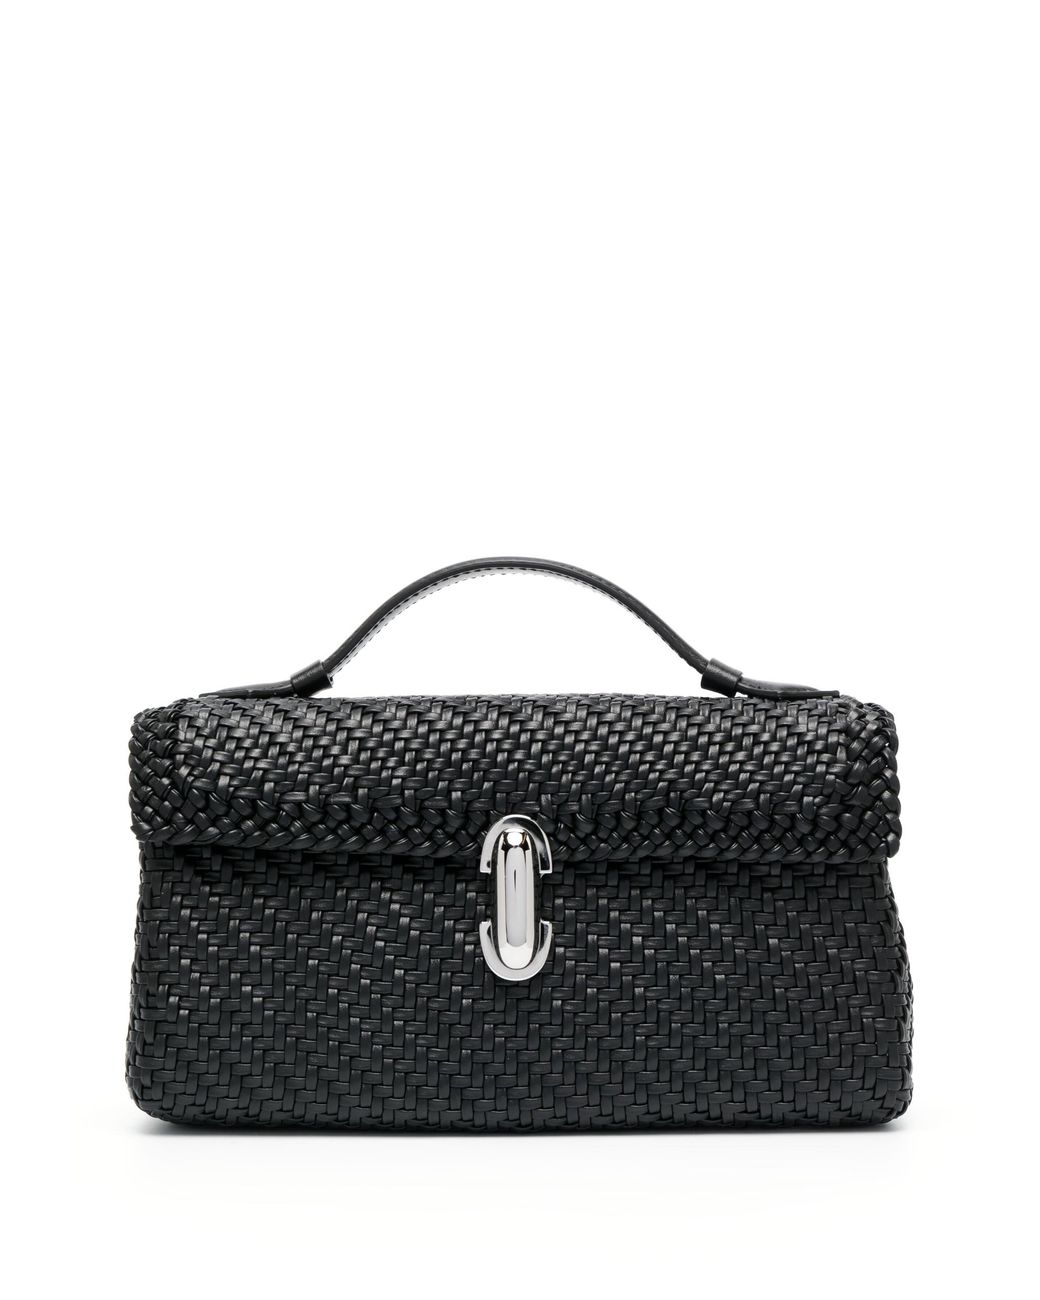 SAVETTE Symmetry Woven Leather Top Handle Bag in Black | Lyst